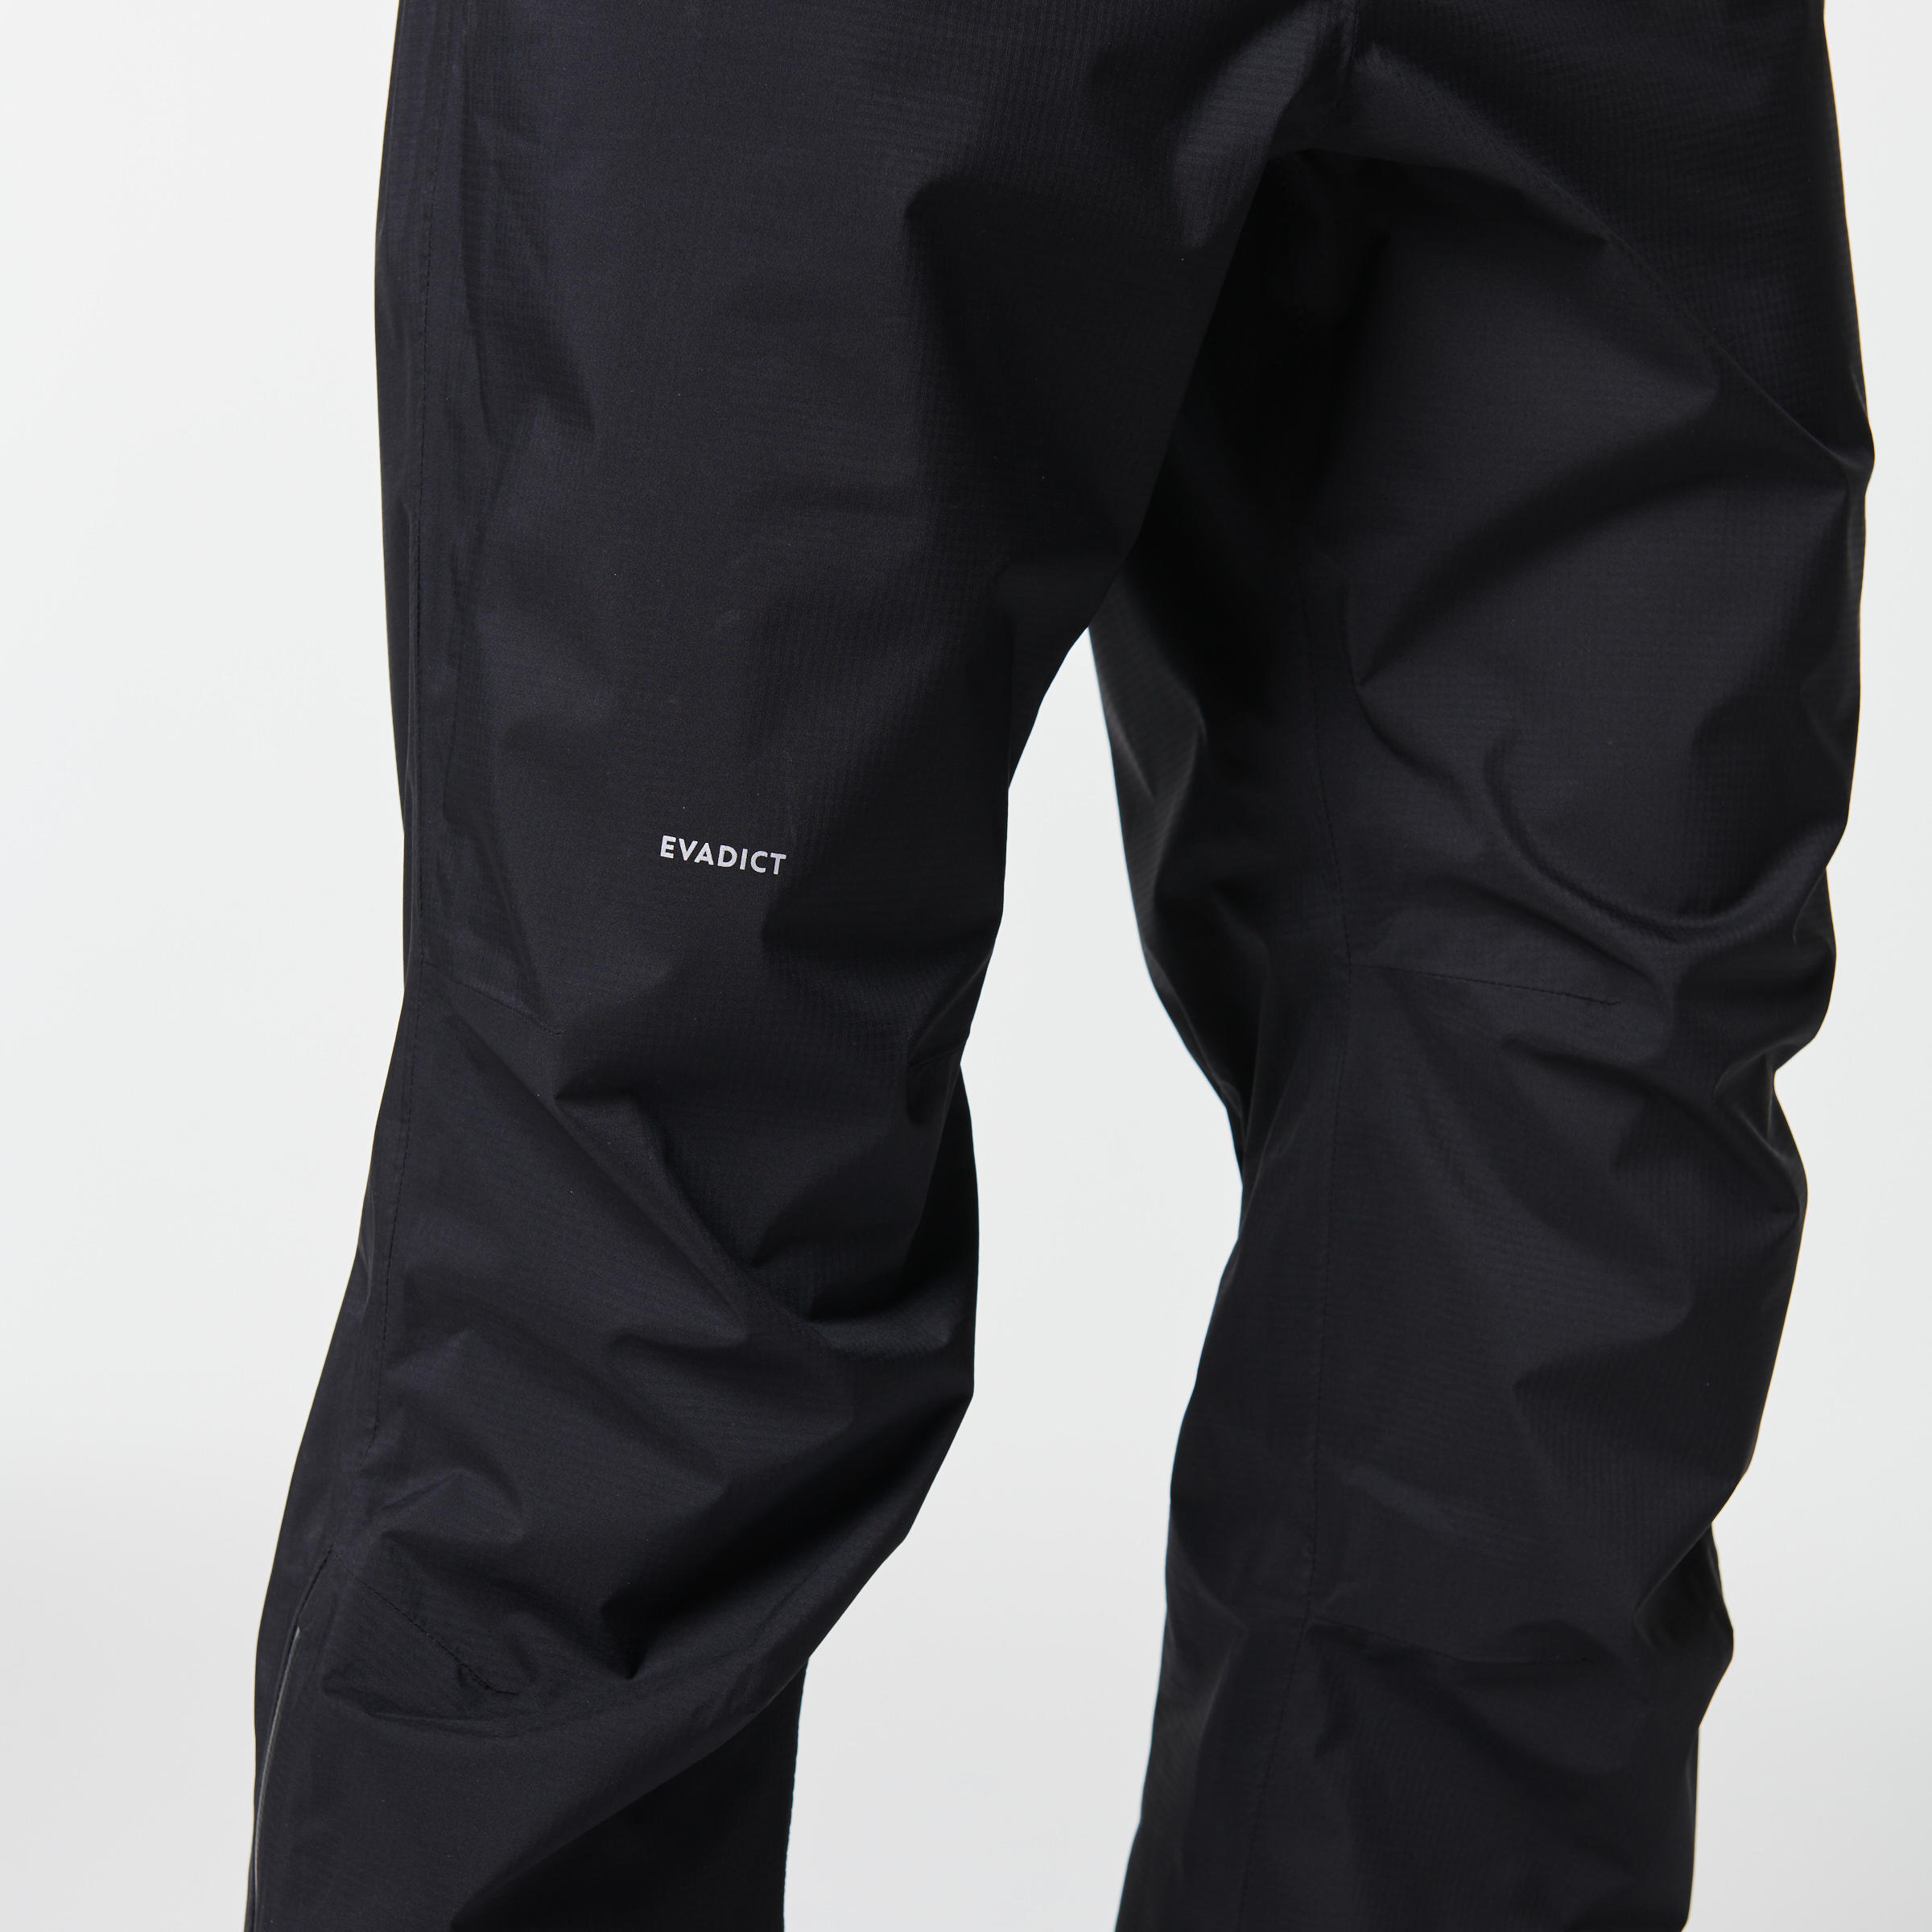 Buy QUECHUA RAINCUT Men's Waterproof Trousers - Black Online at Low Prices  in India - Amazon.in